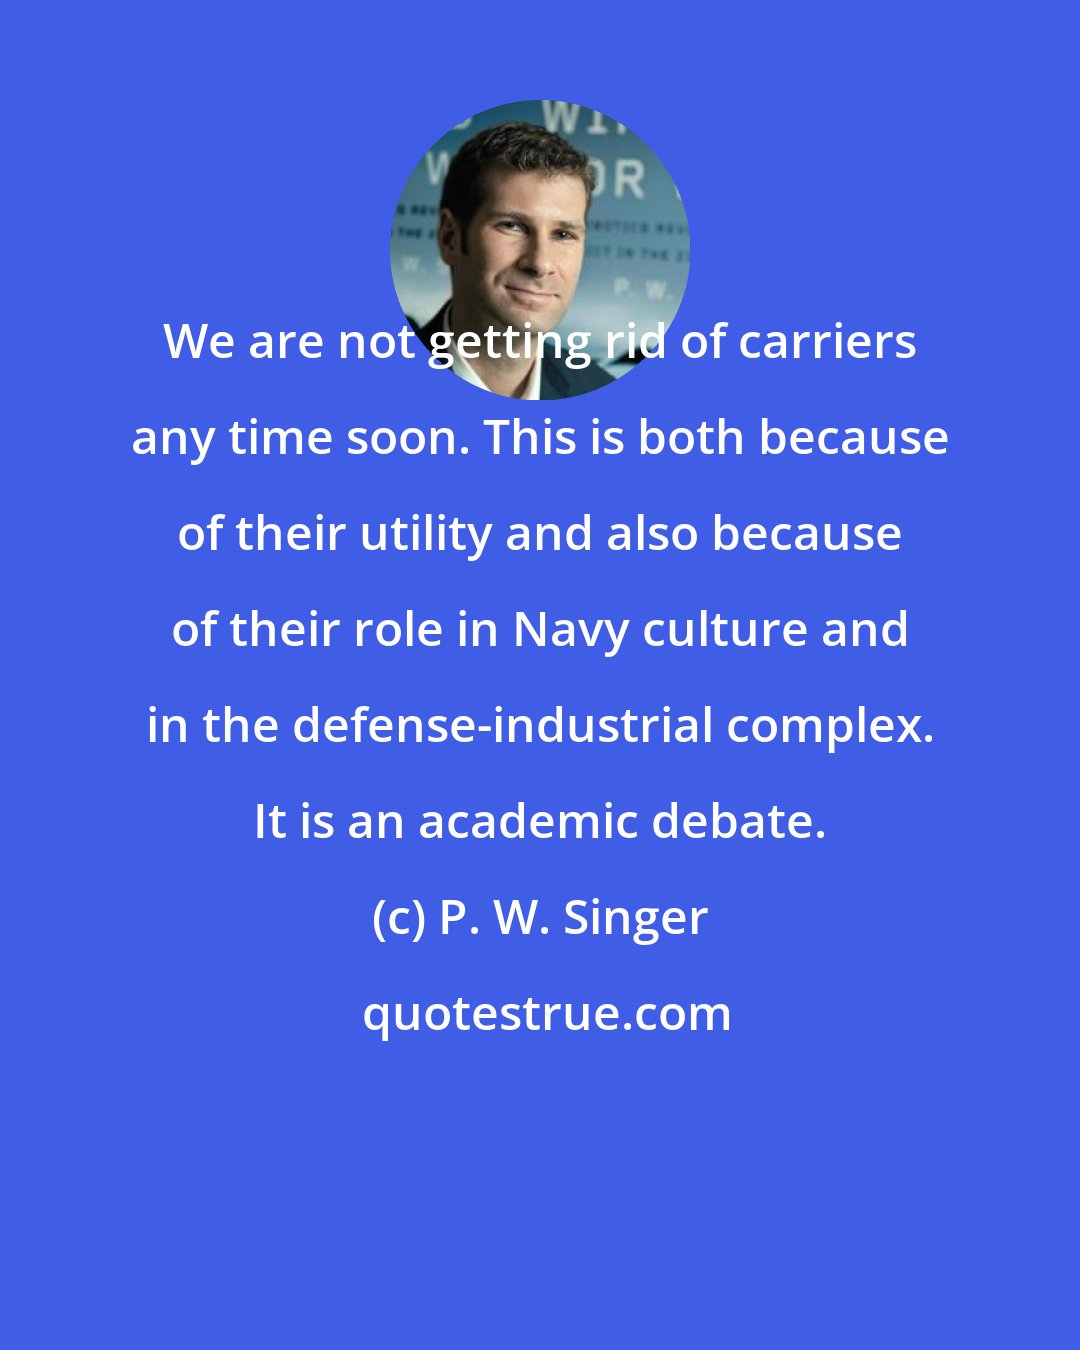 P. W. Singer: We are not getting rid of carriers any time soon. This is both because of their utility and also because of their role in Navy culture and in the defense-industrial complex. It is an academic debate.